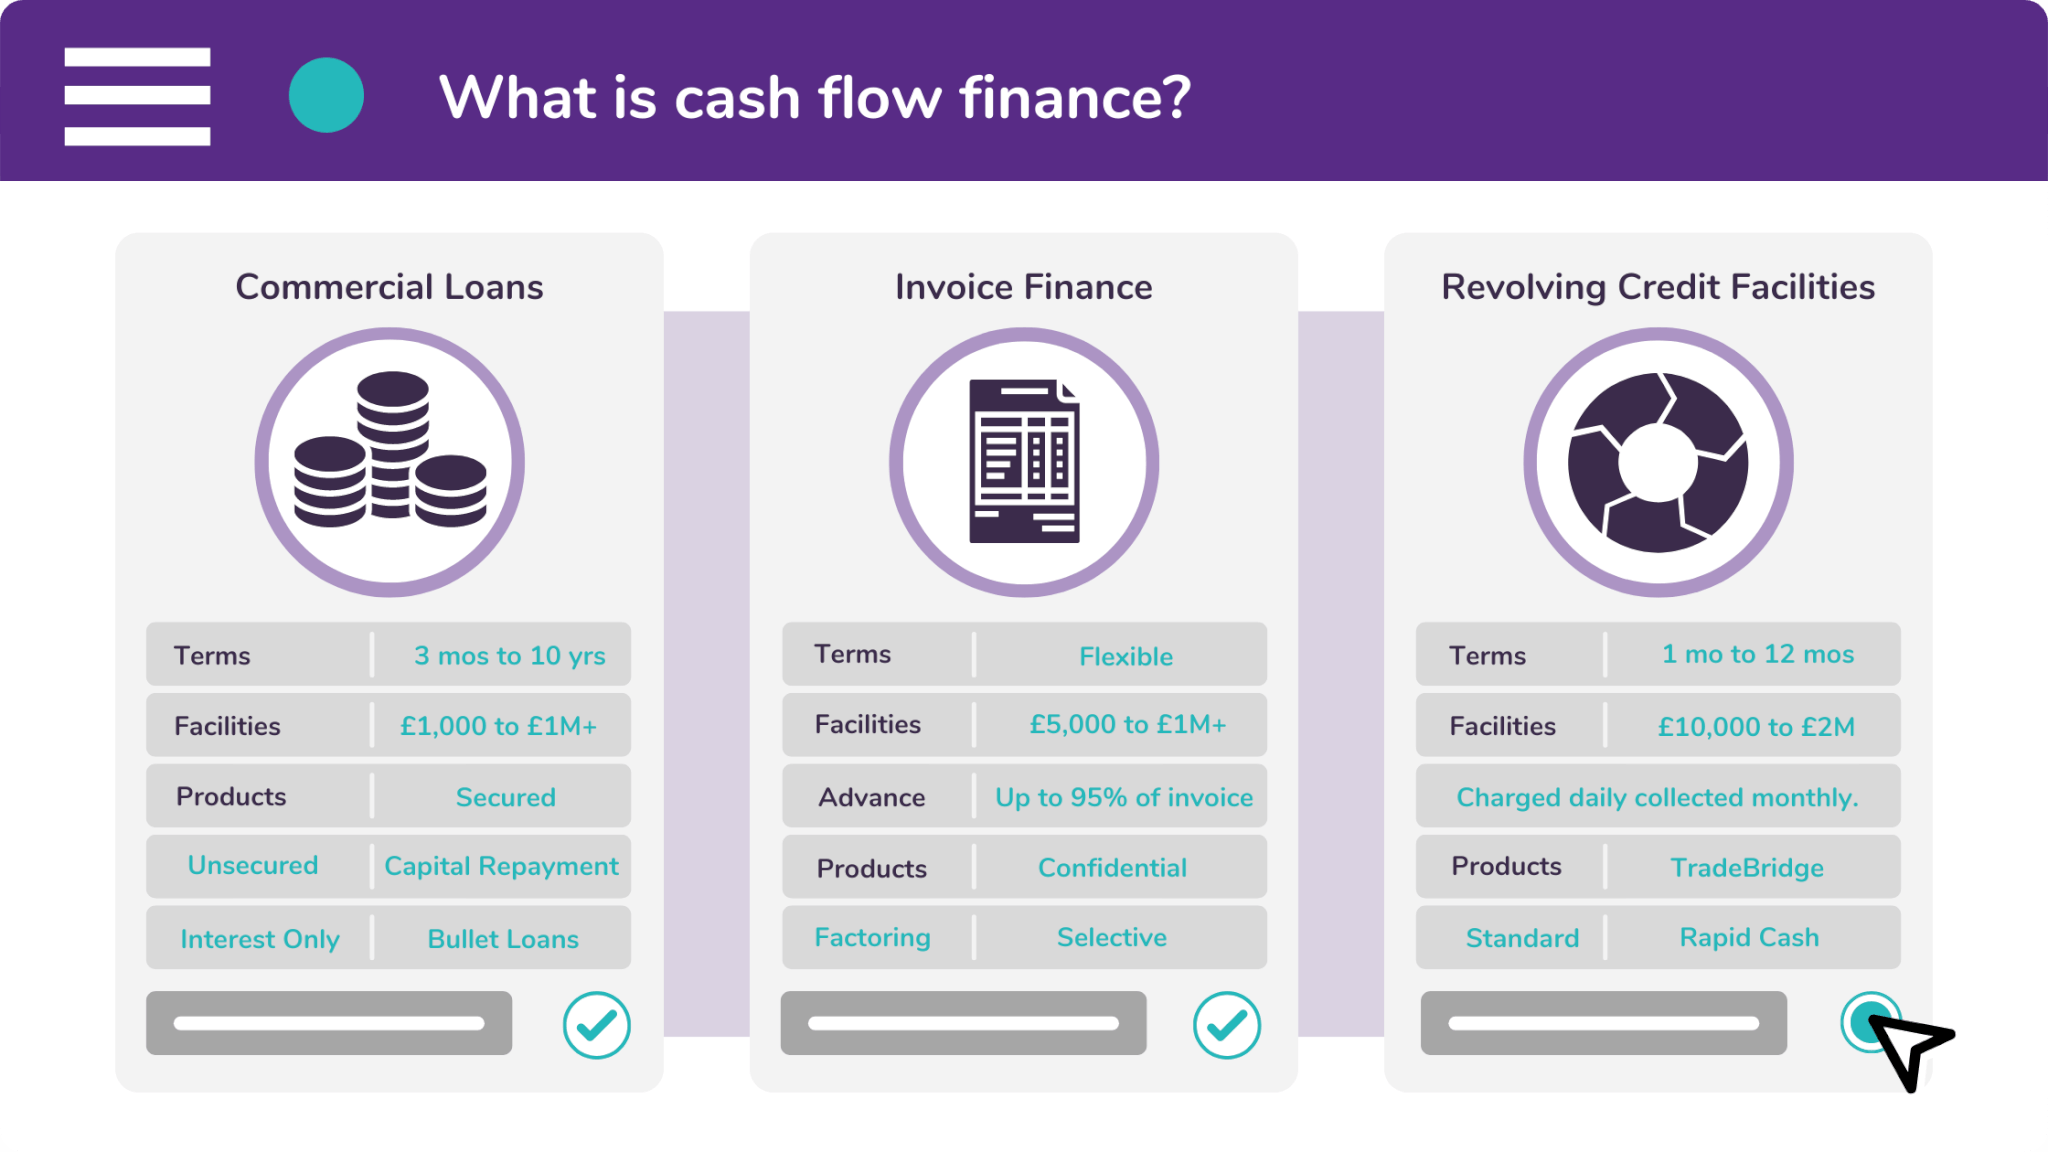 There are three types of cash flow finance that we provide at Synergi: commercial loans, invoice finance, and revolving credit.